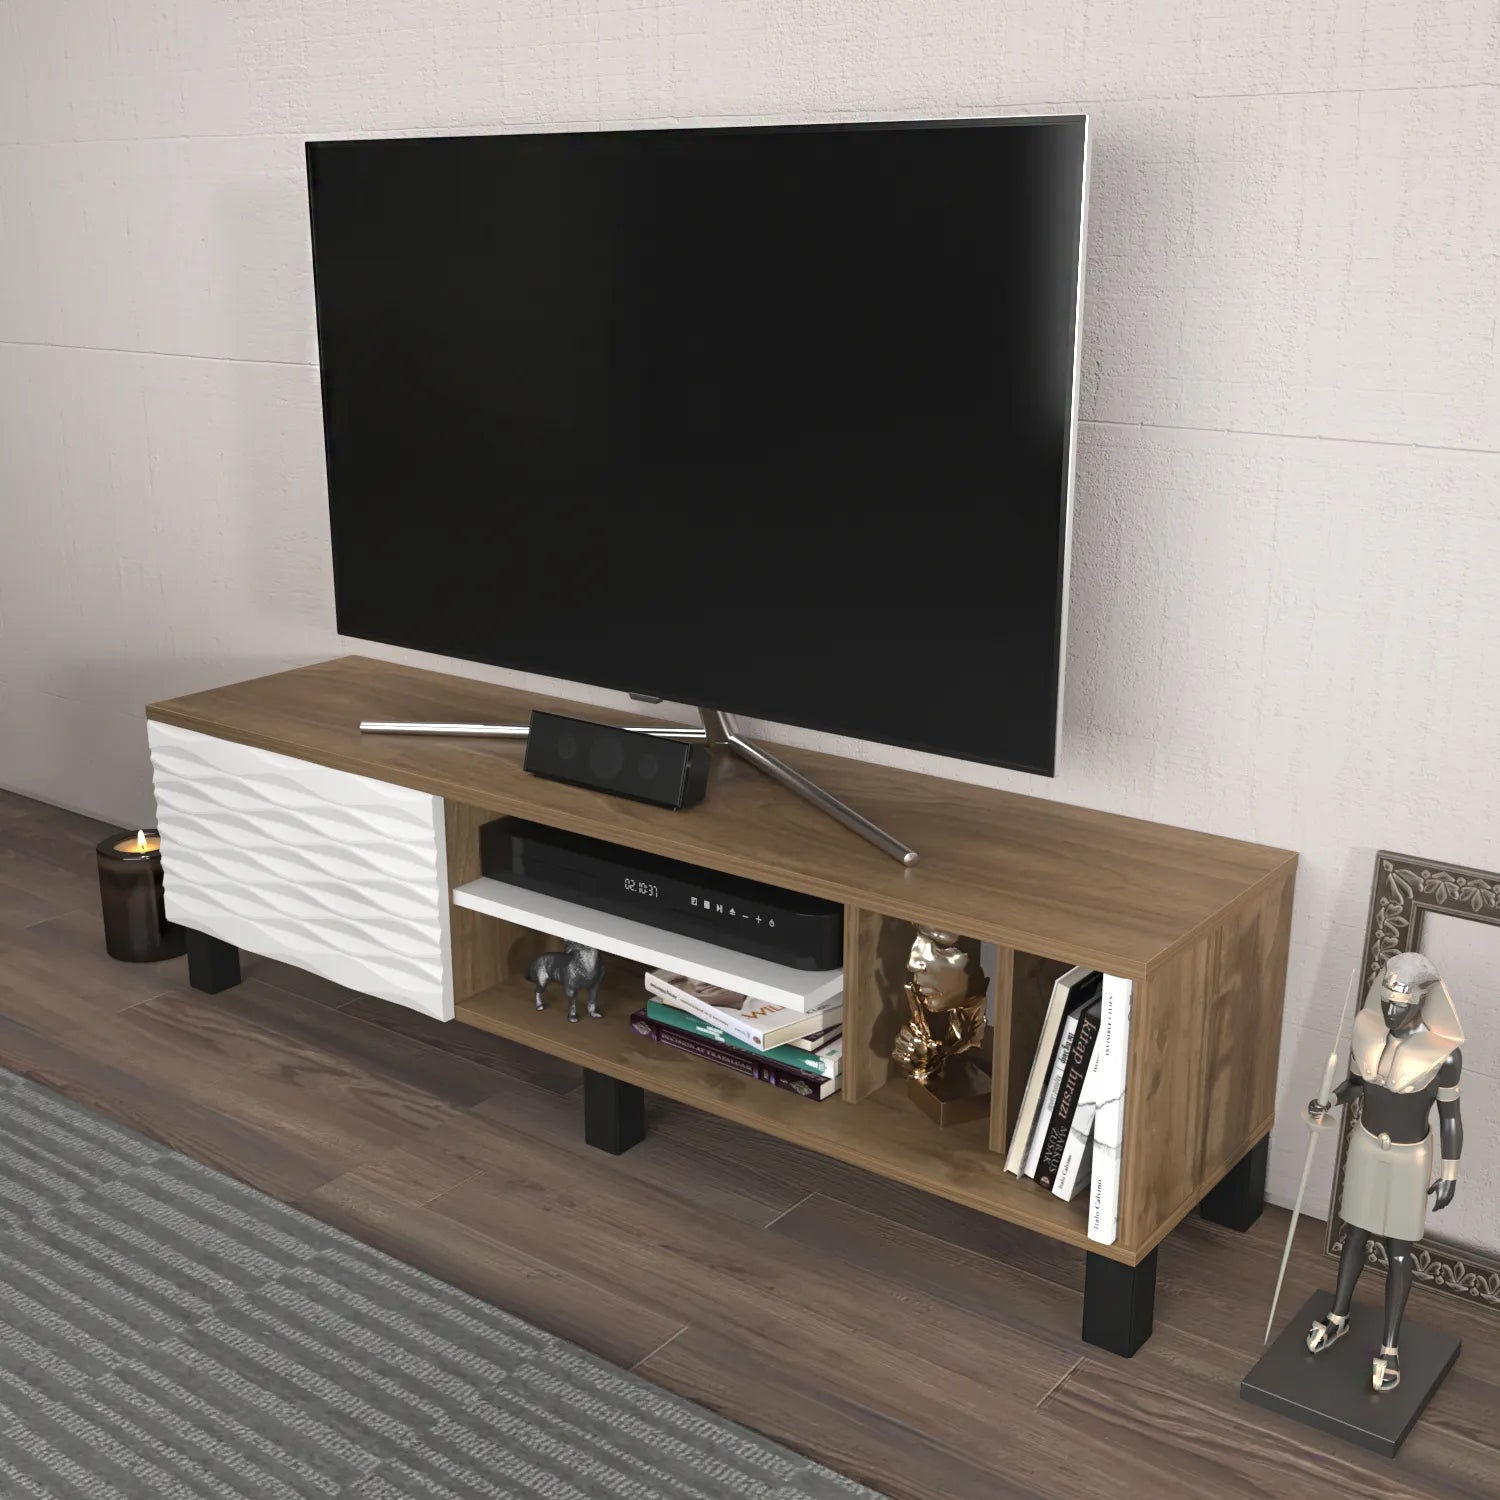 Olyo 55 inch Wide TV Stand Media Console for TVs up to 60 inch